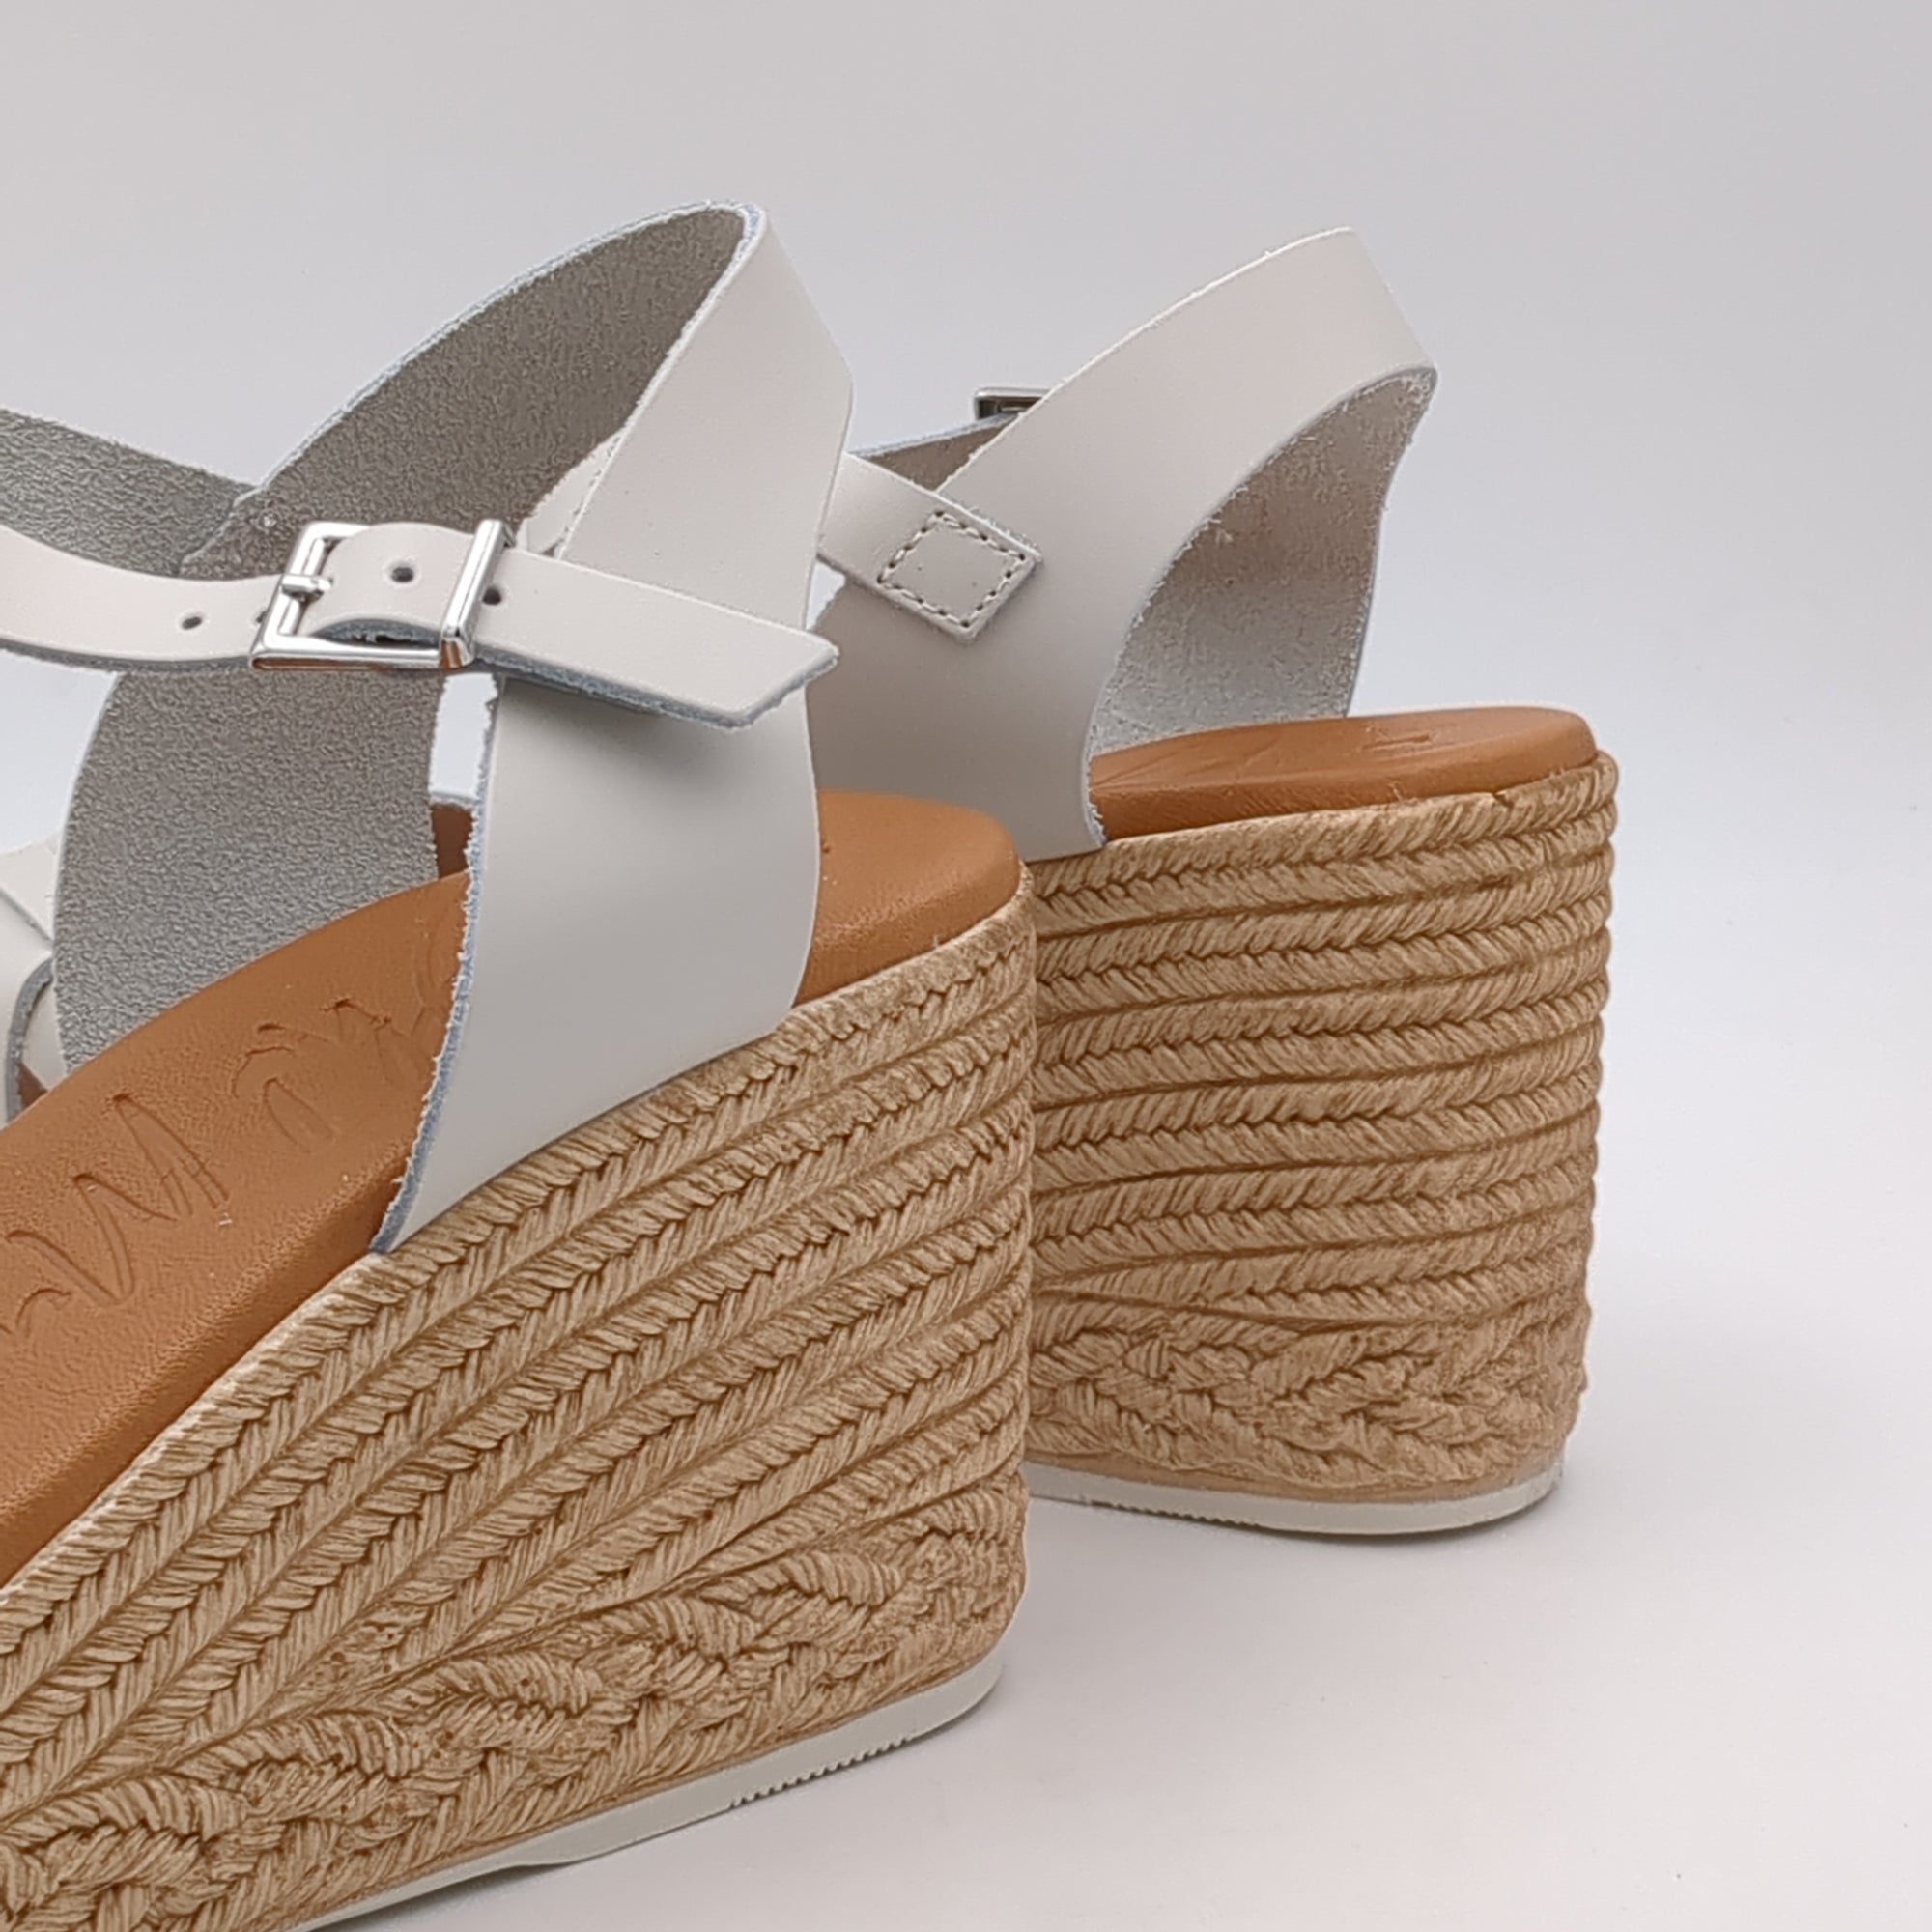 Full view of the sandal showcasing the square toe and neutral cream upper.